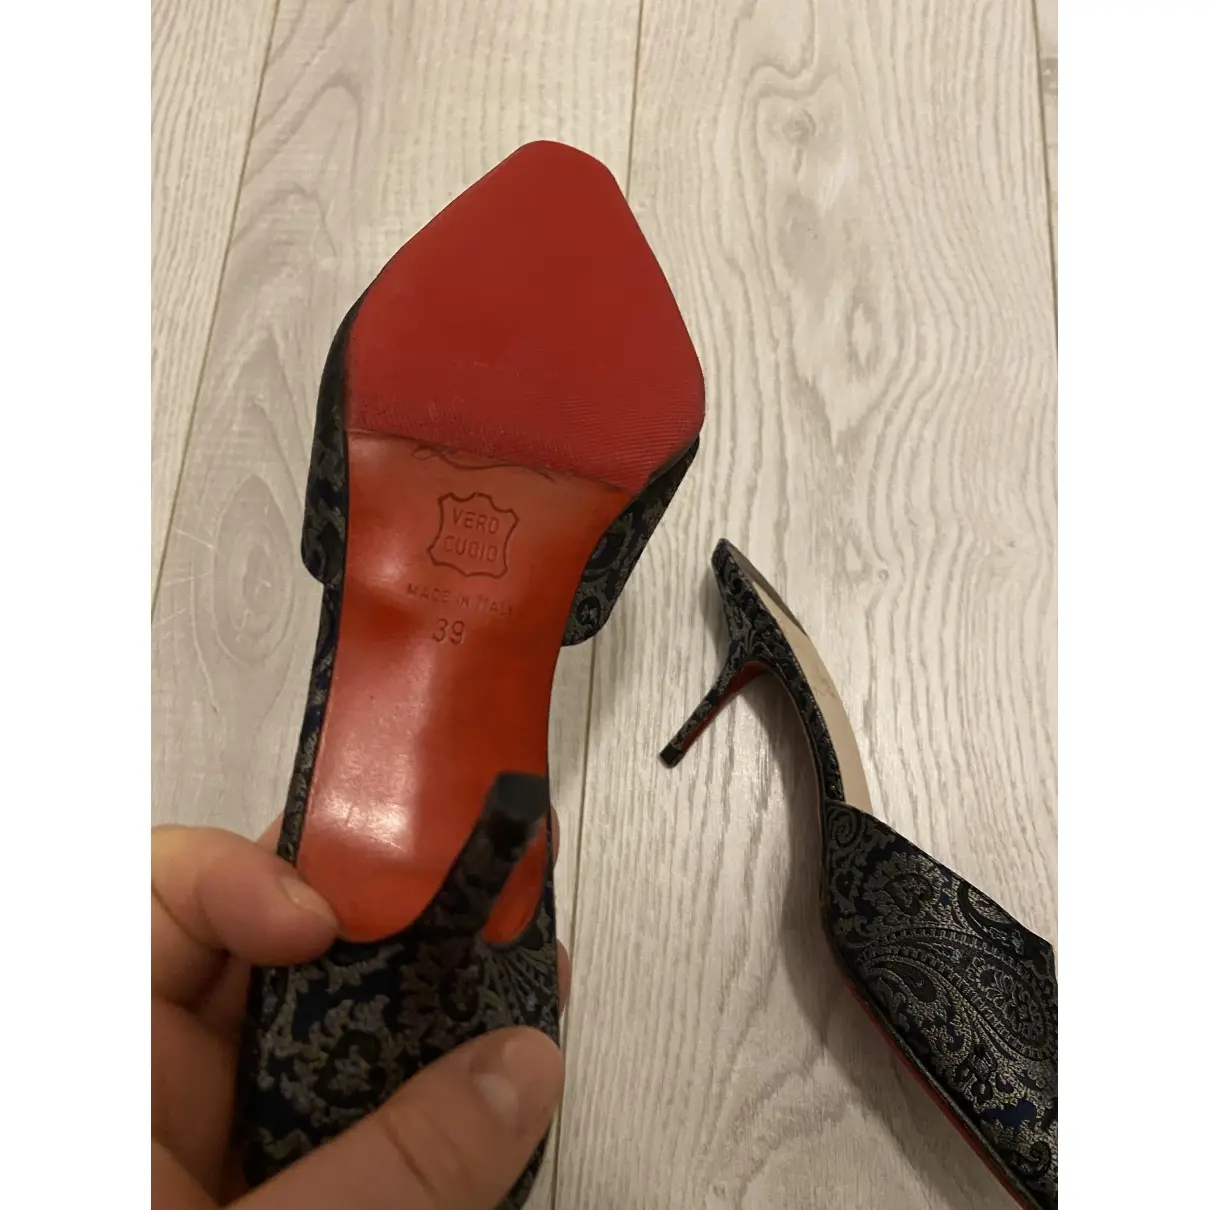 Buy Christian Louboutin Cloth mules & clogs online